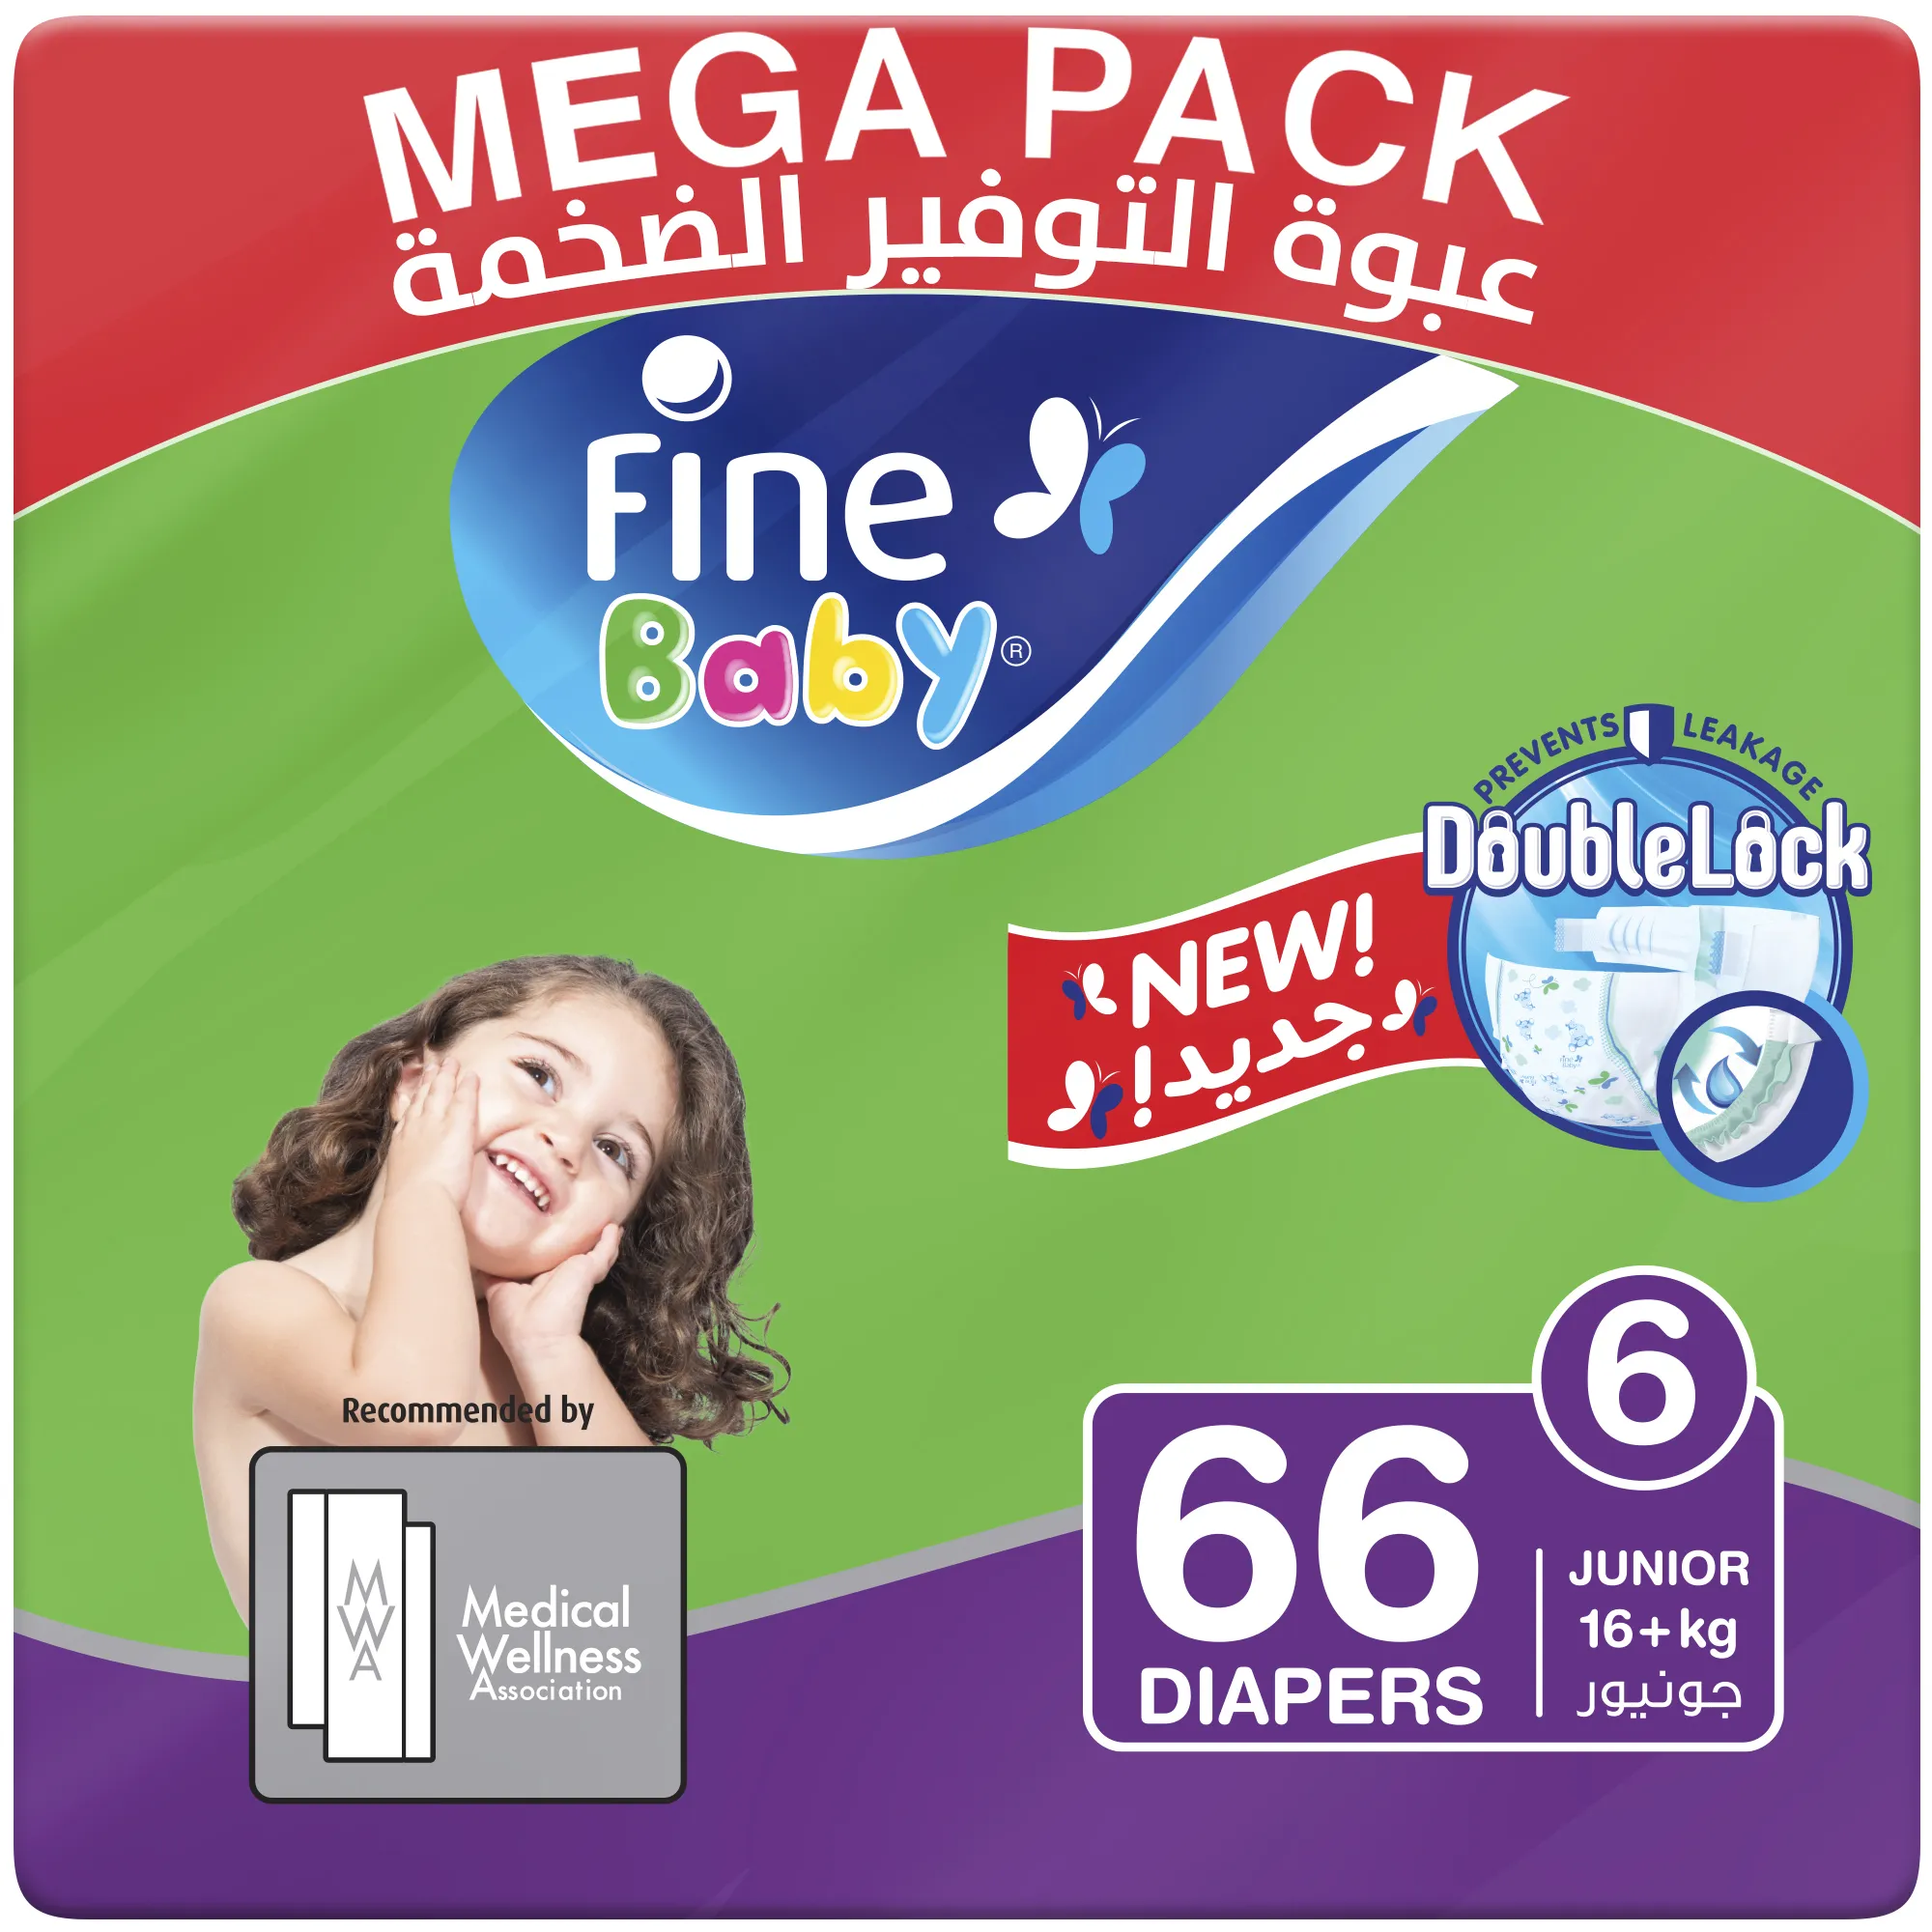 Fine Baby Diapers, Size 6, Junior 16+ kg, Mega Pack of 66 diapers